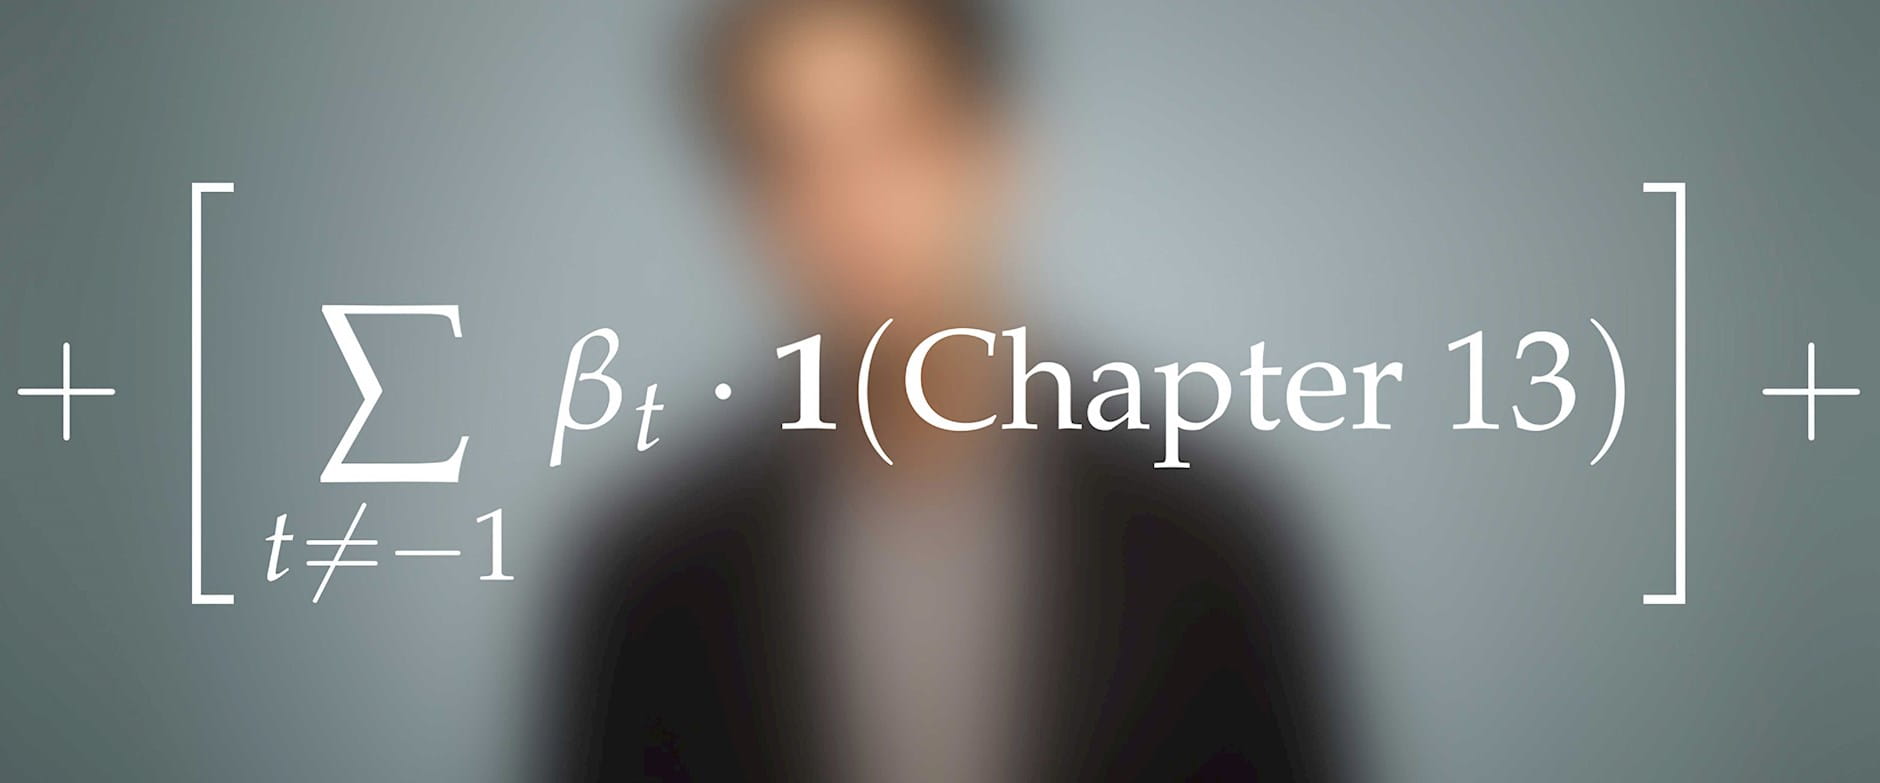 Portion of summation equation in front of blurred man